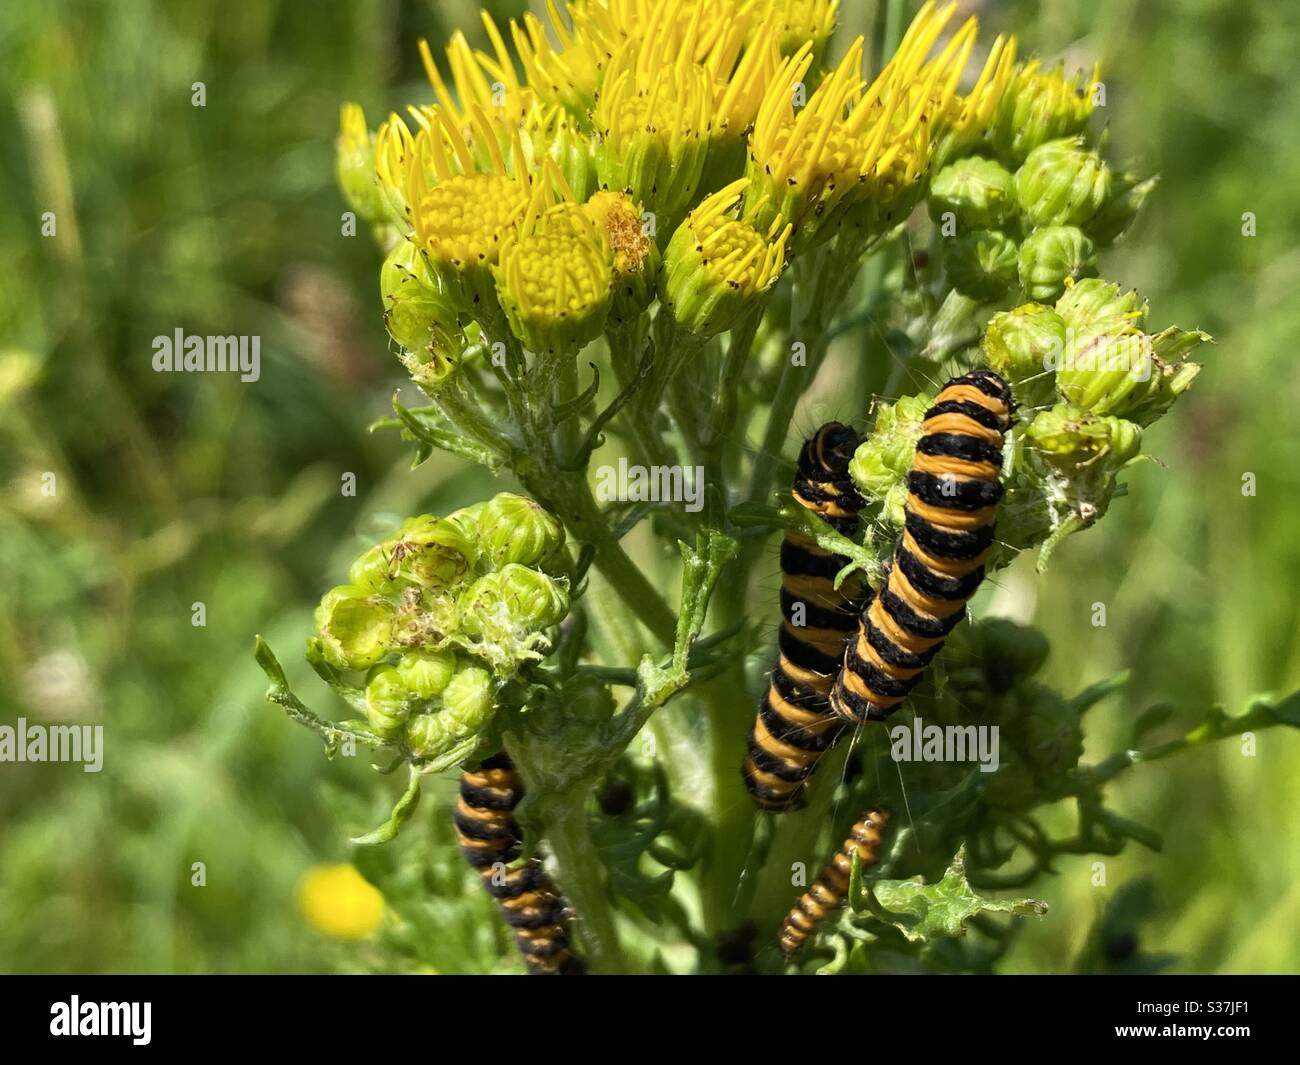 Caterpillars on a plant in their natural habitat Stock Photo